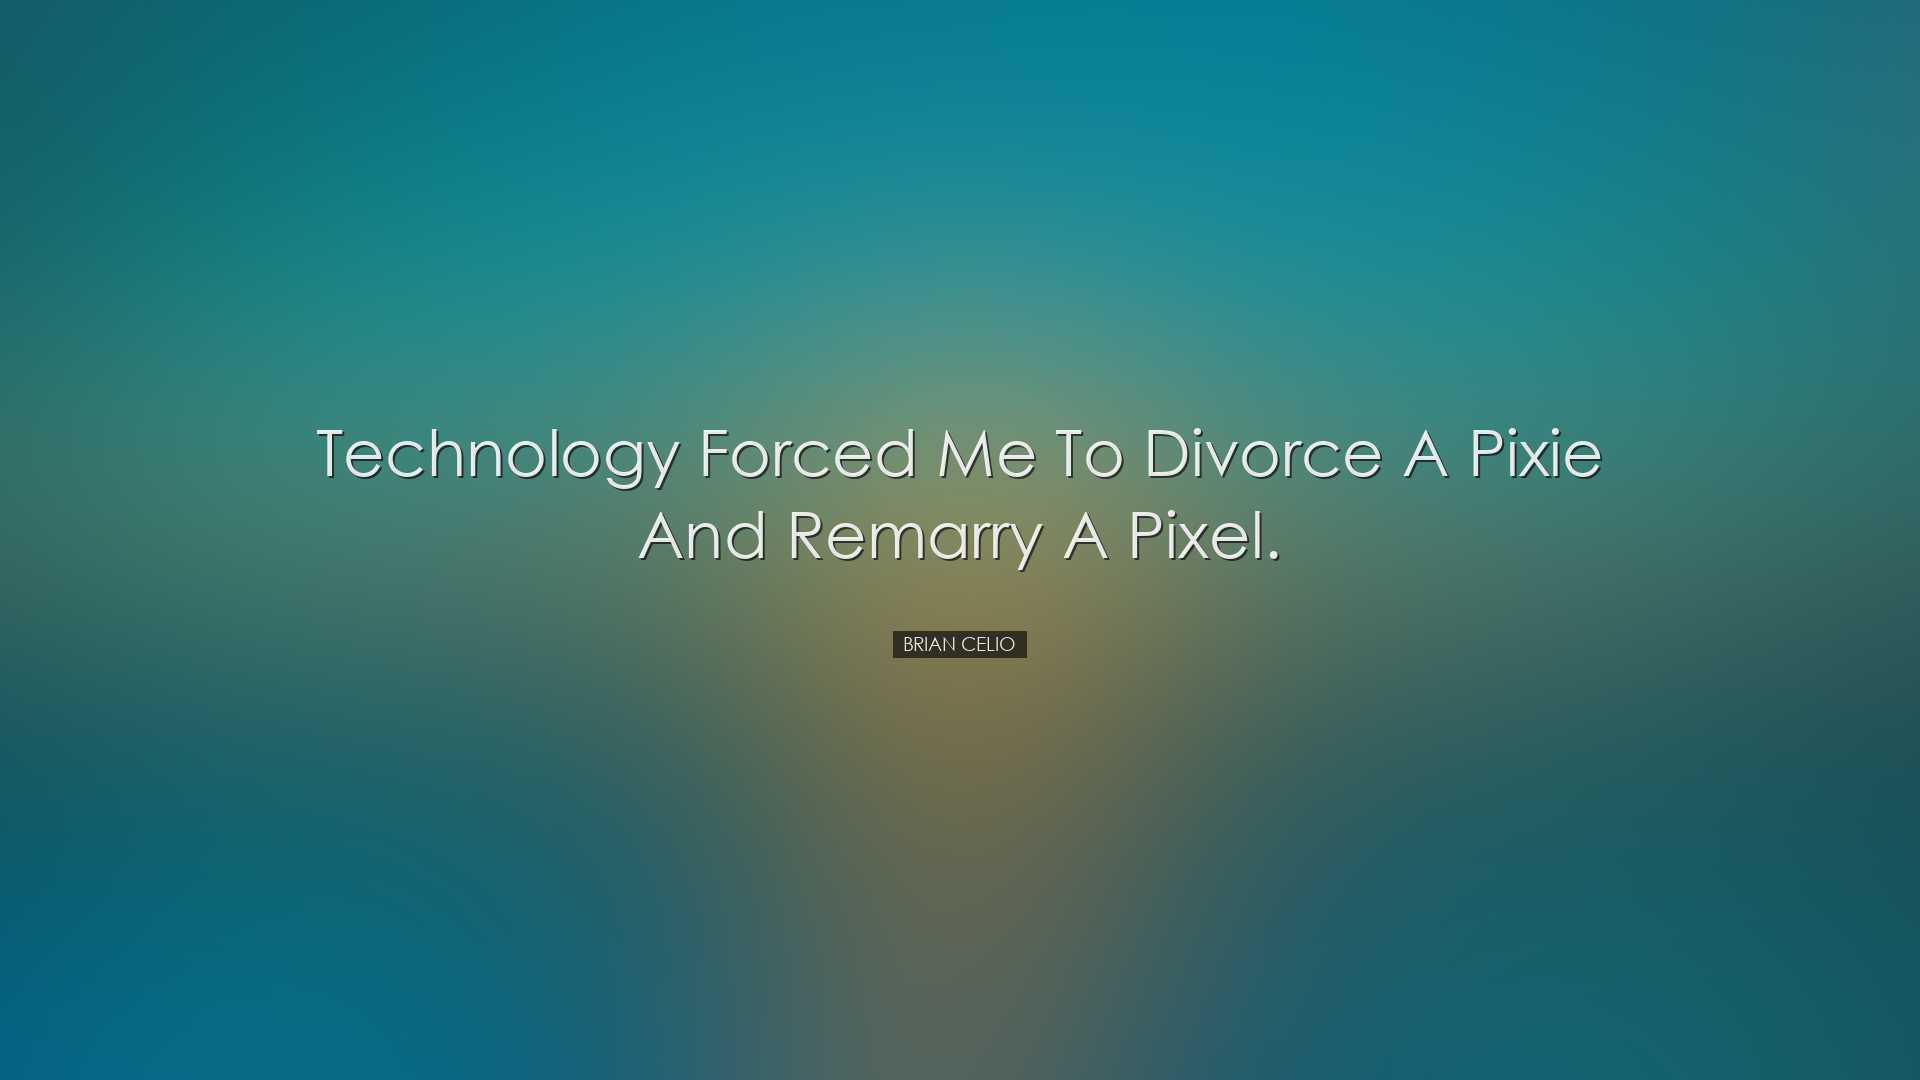 Technology forced me to divorce a pixie and remarry a pixel. - Bri